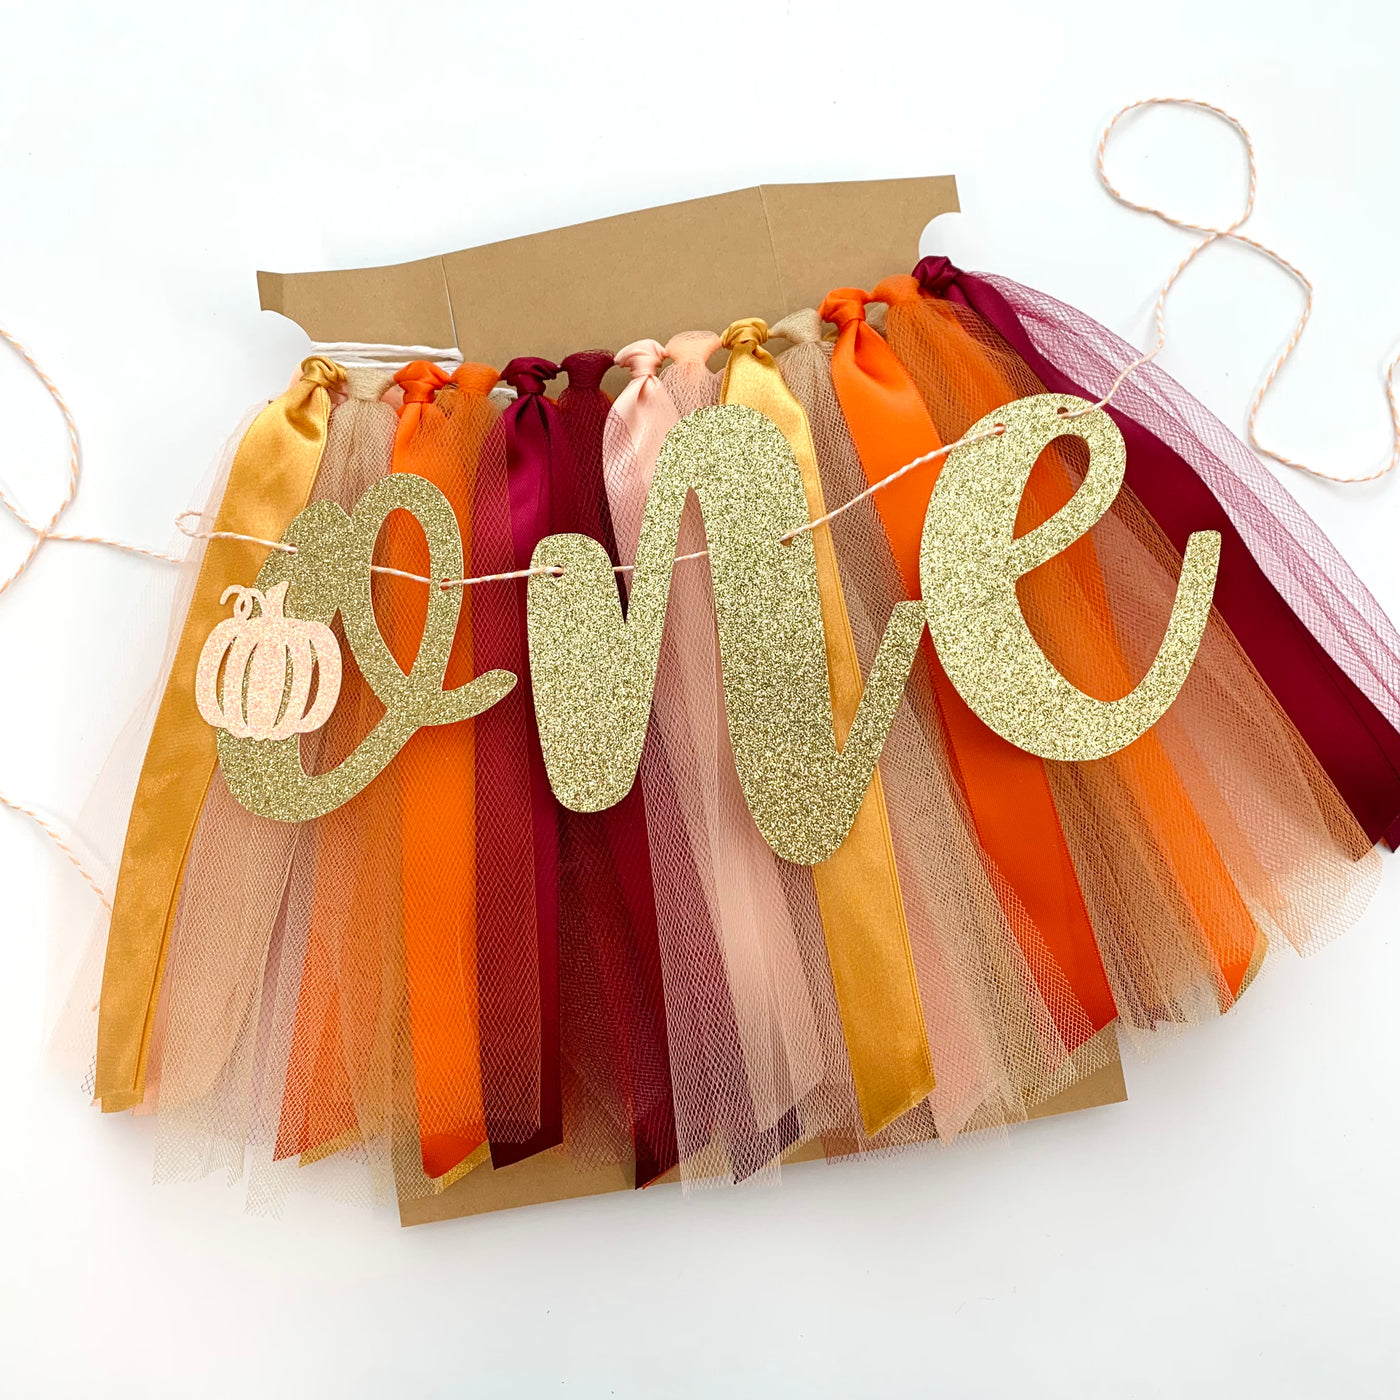 Our Little Pumpkin Is Turning One High Chair Tutu Skirt Banner, First Birthday Party Decorations BG